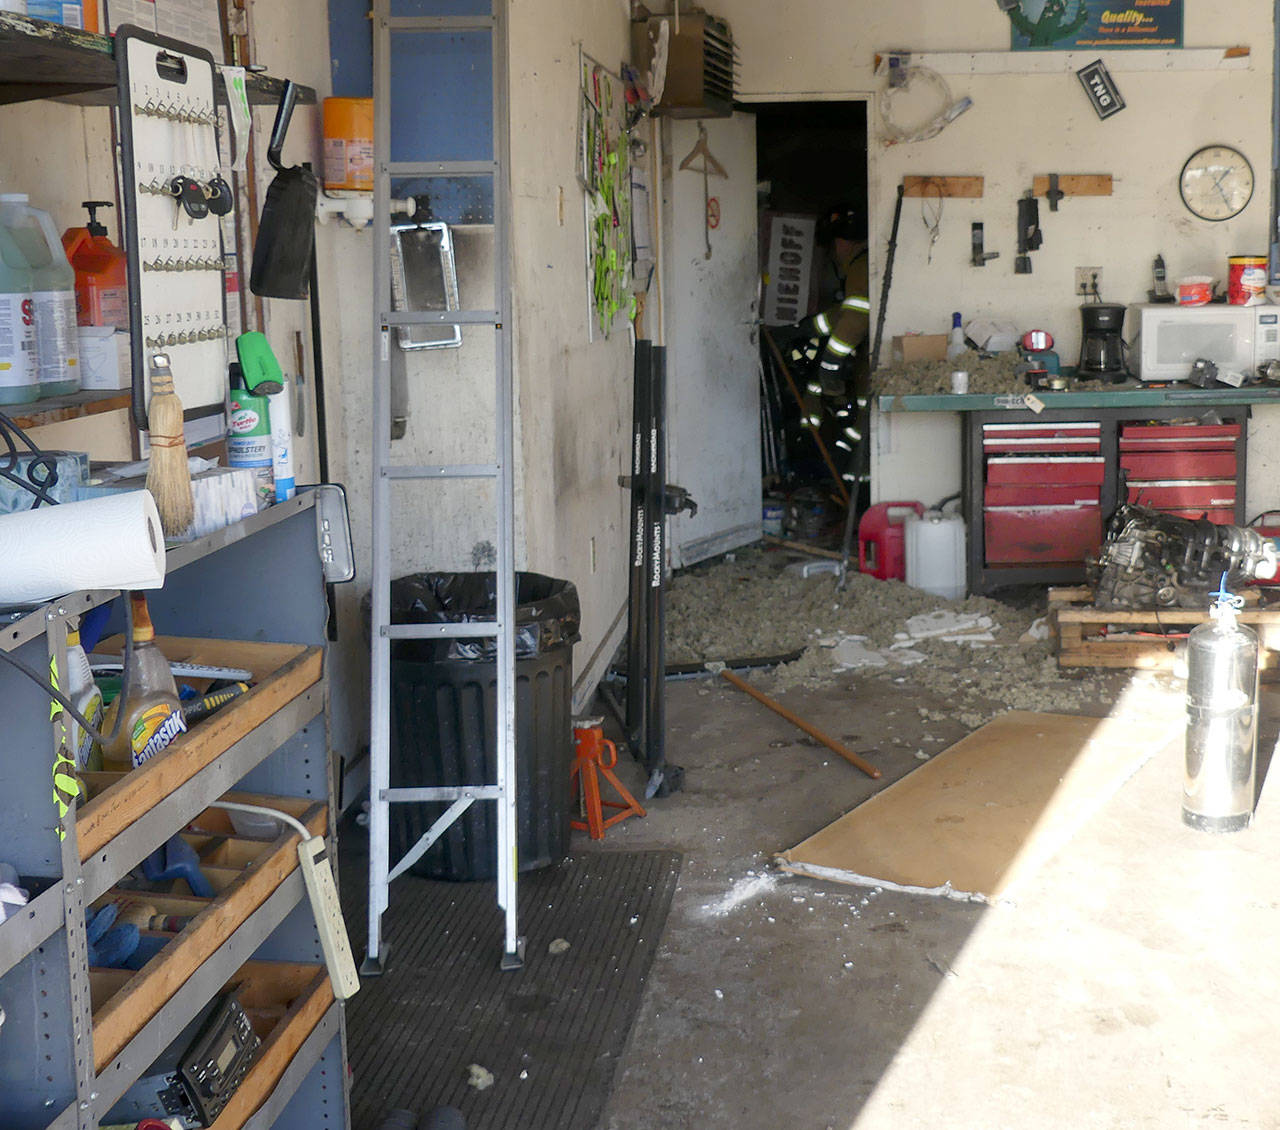 Owner Charles Gary and mechanic David Stratton extinguished an oil rag fire in this shop Tuesday, Dec. 22, 2020. (Courtesy photo)